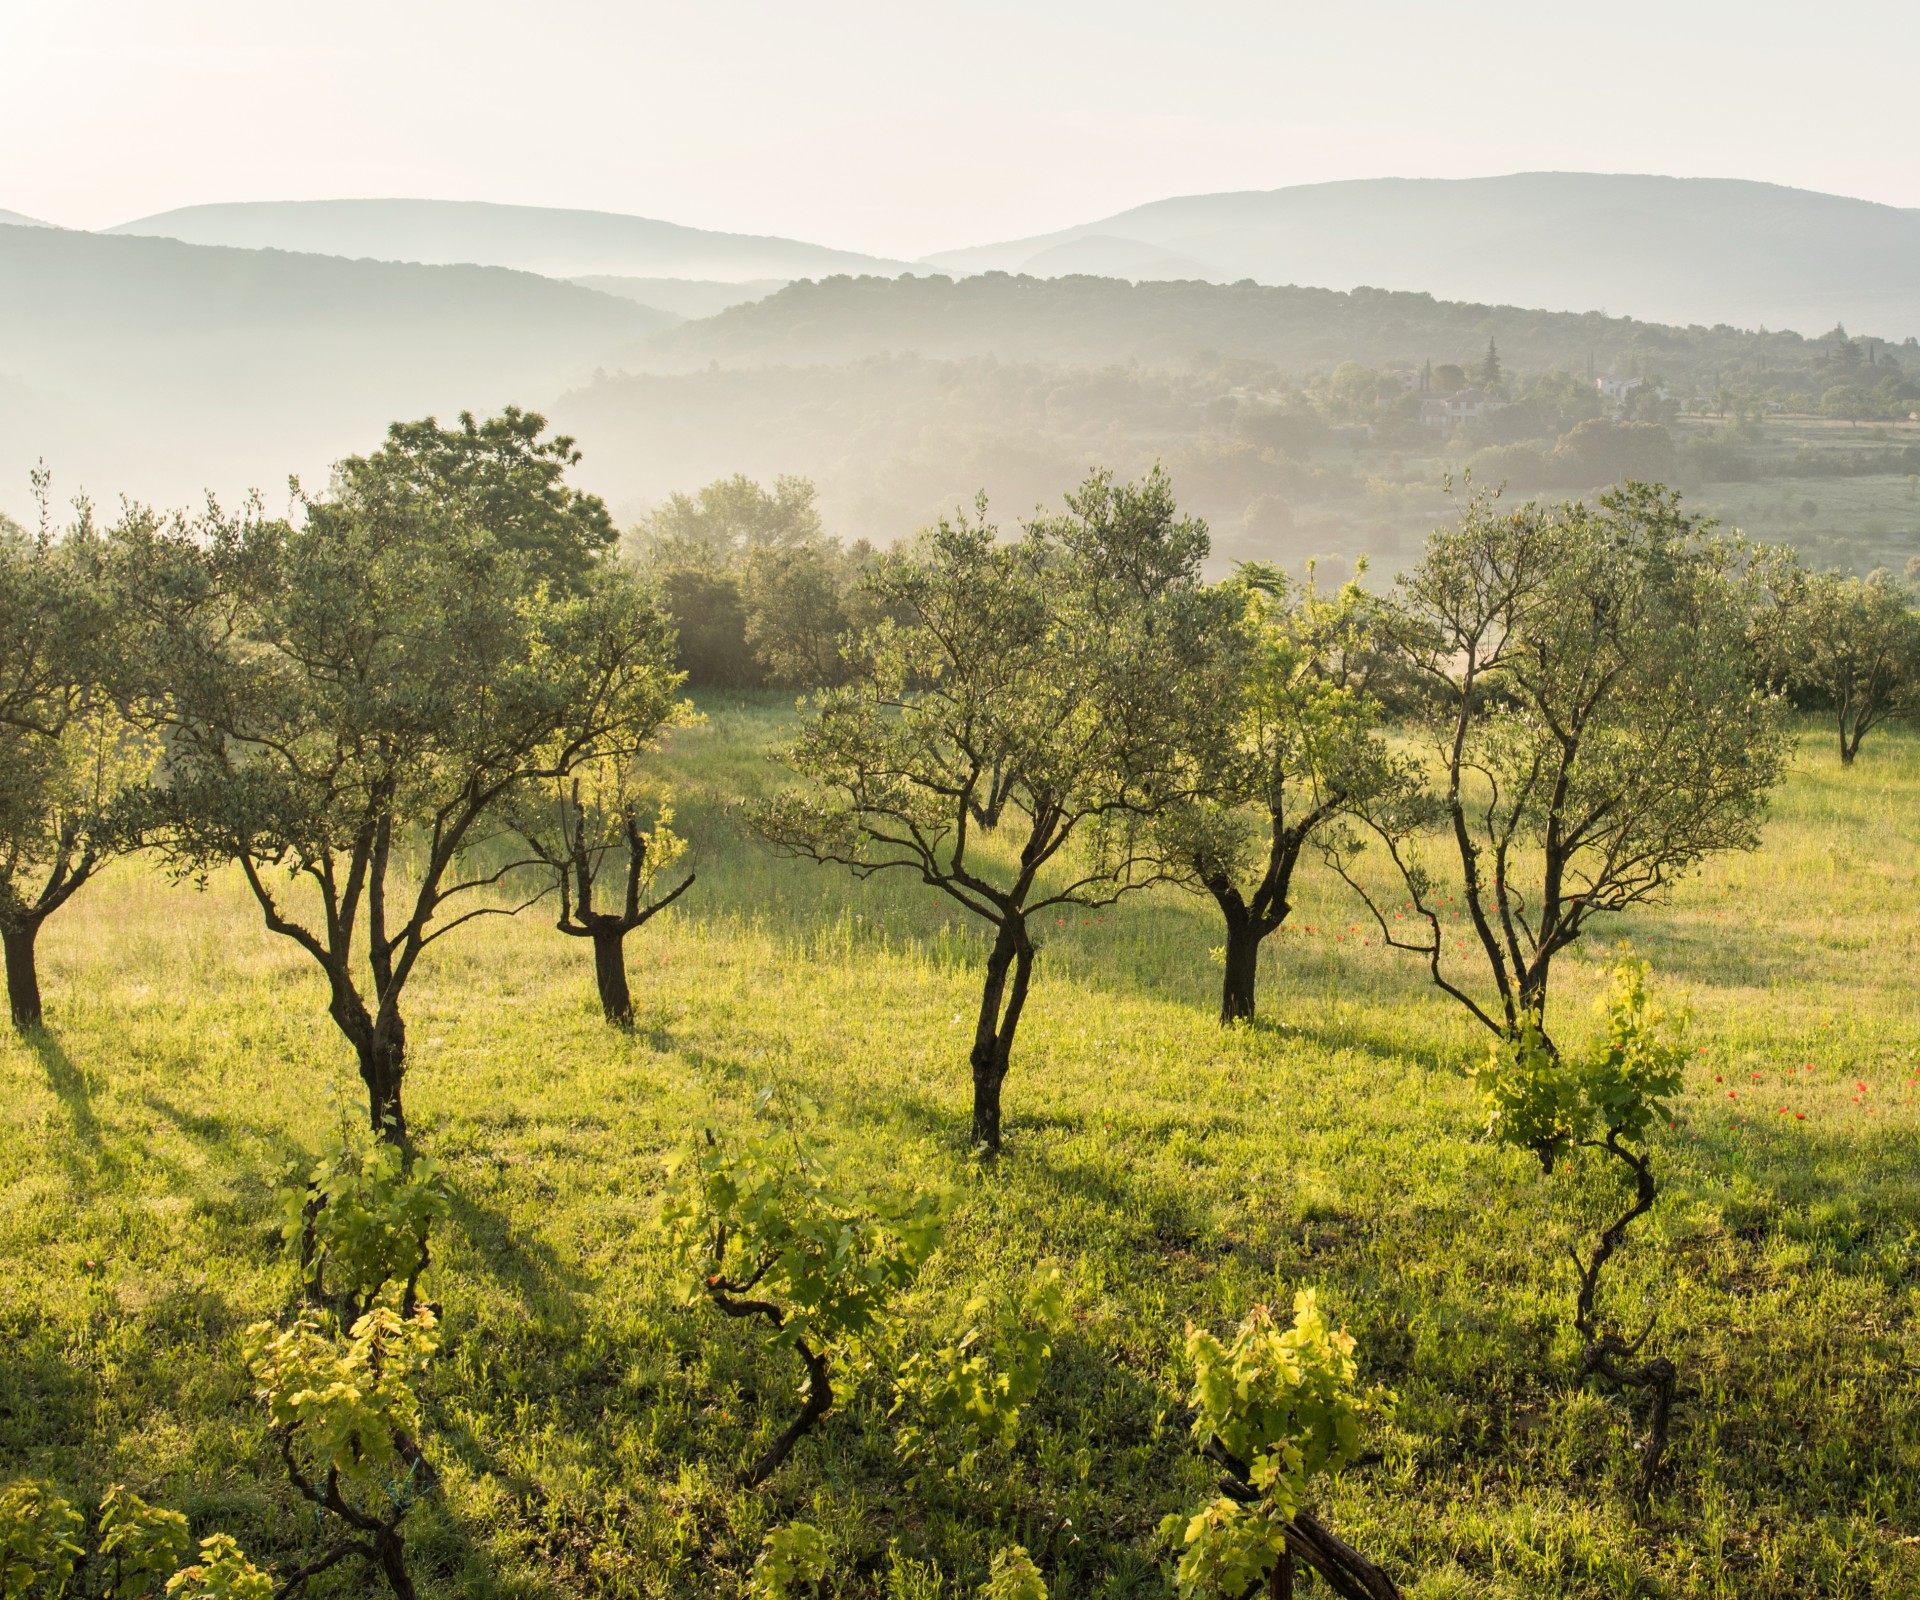 Olive groves on green meadow in front of misty hilly landscape in the background